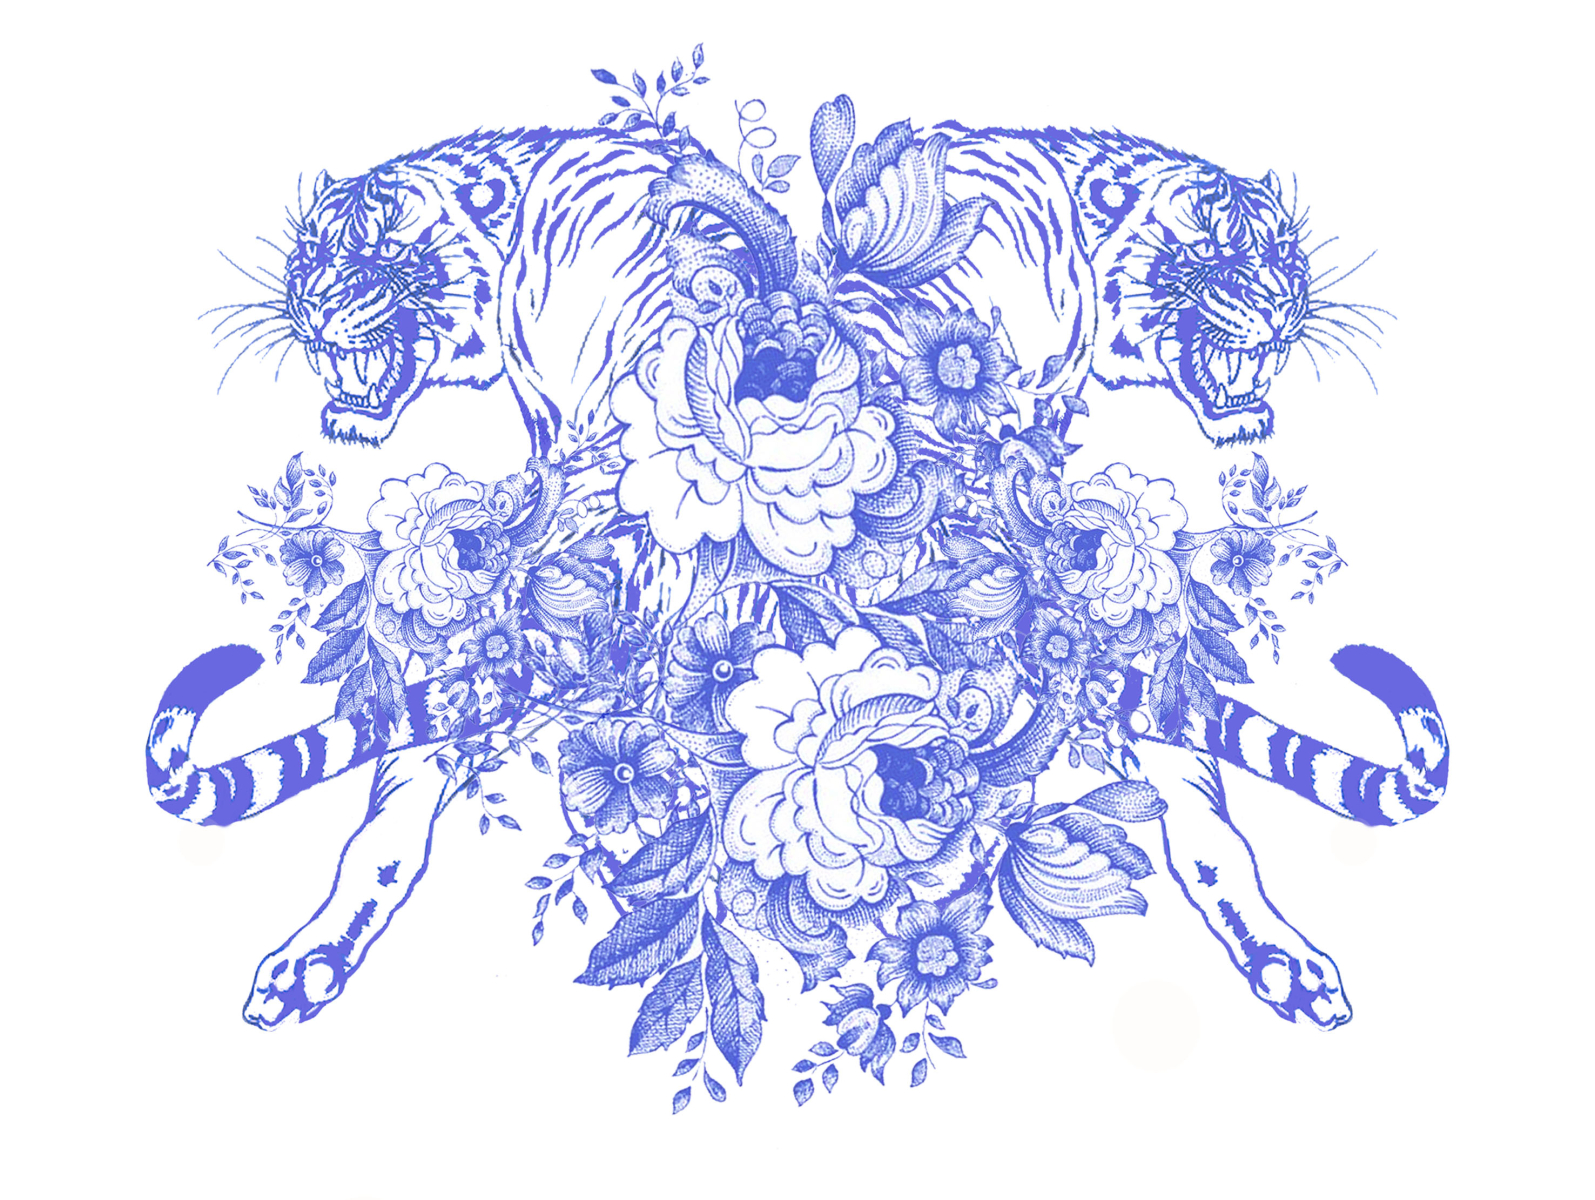 Tiger Print - Toile de Jouy Style by Mariana Di Maio on Dribbble